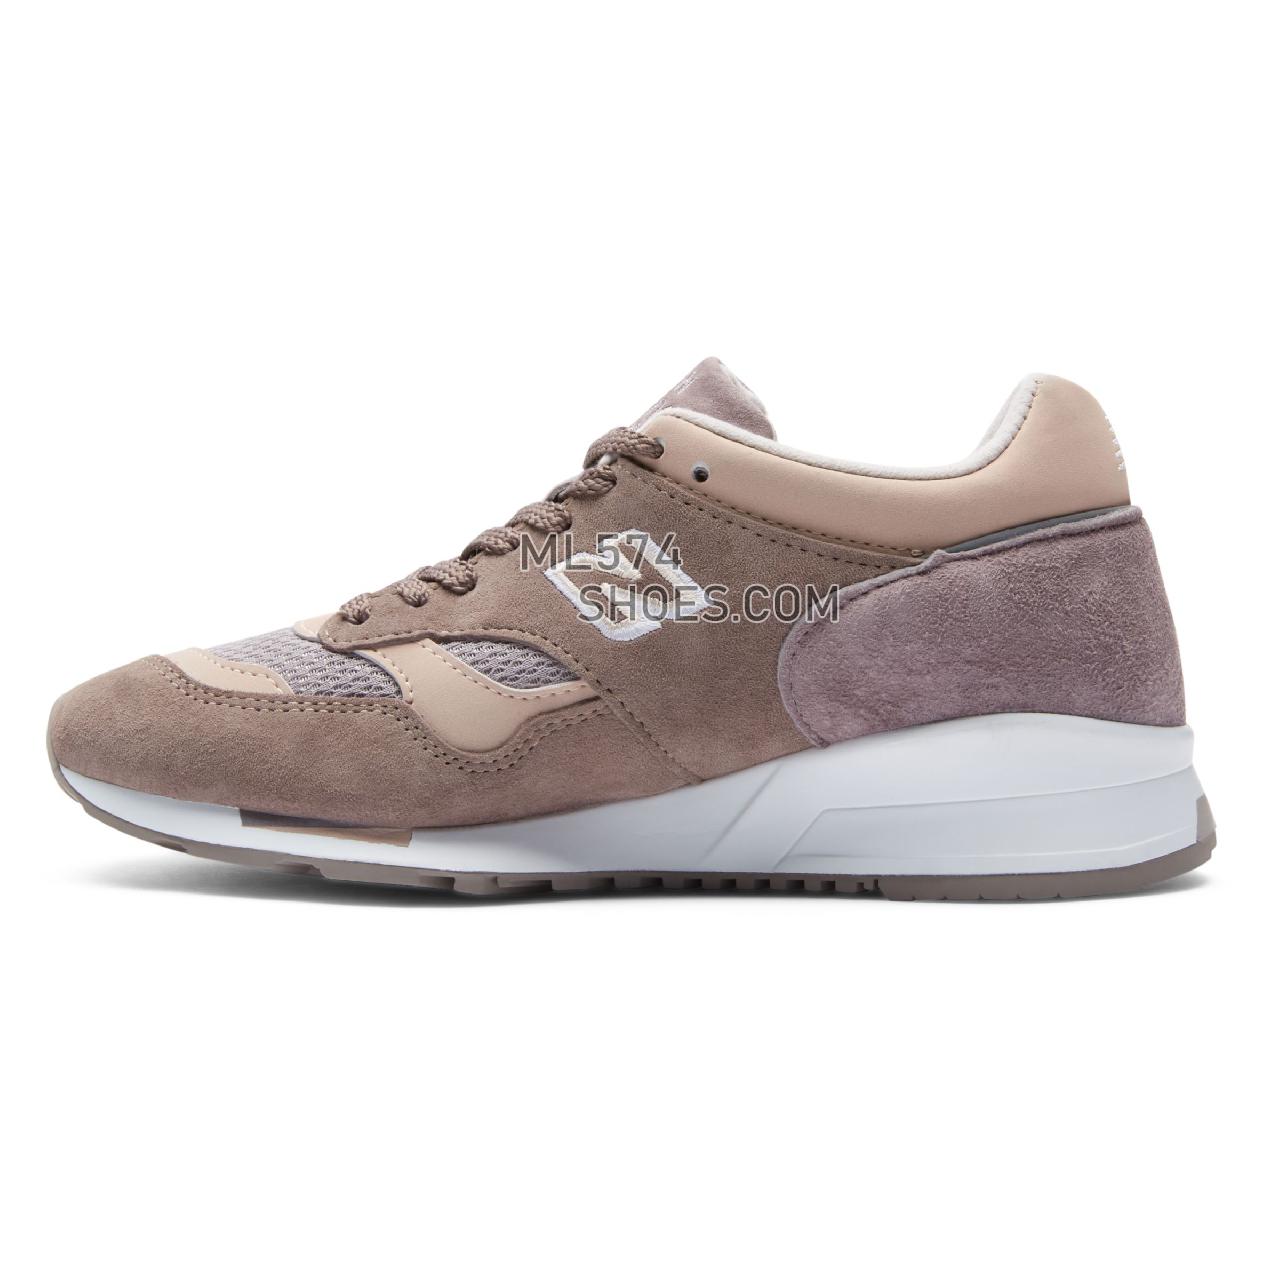 New Balance 1500 Made in UK - Men's 1500 Made in UK Classic W1500-PM - Grey with Pinky Grey - W1500LGS